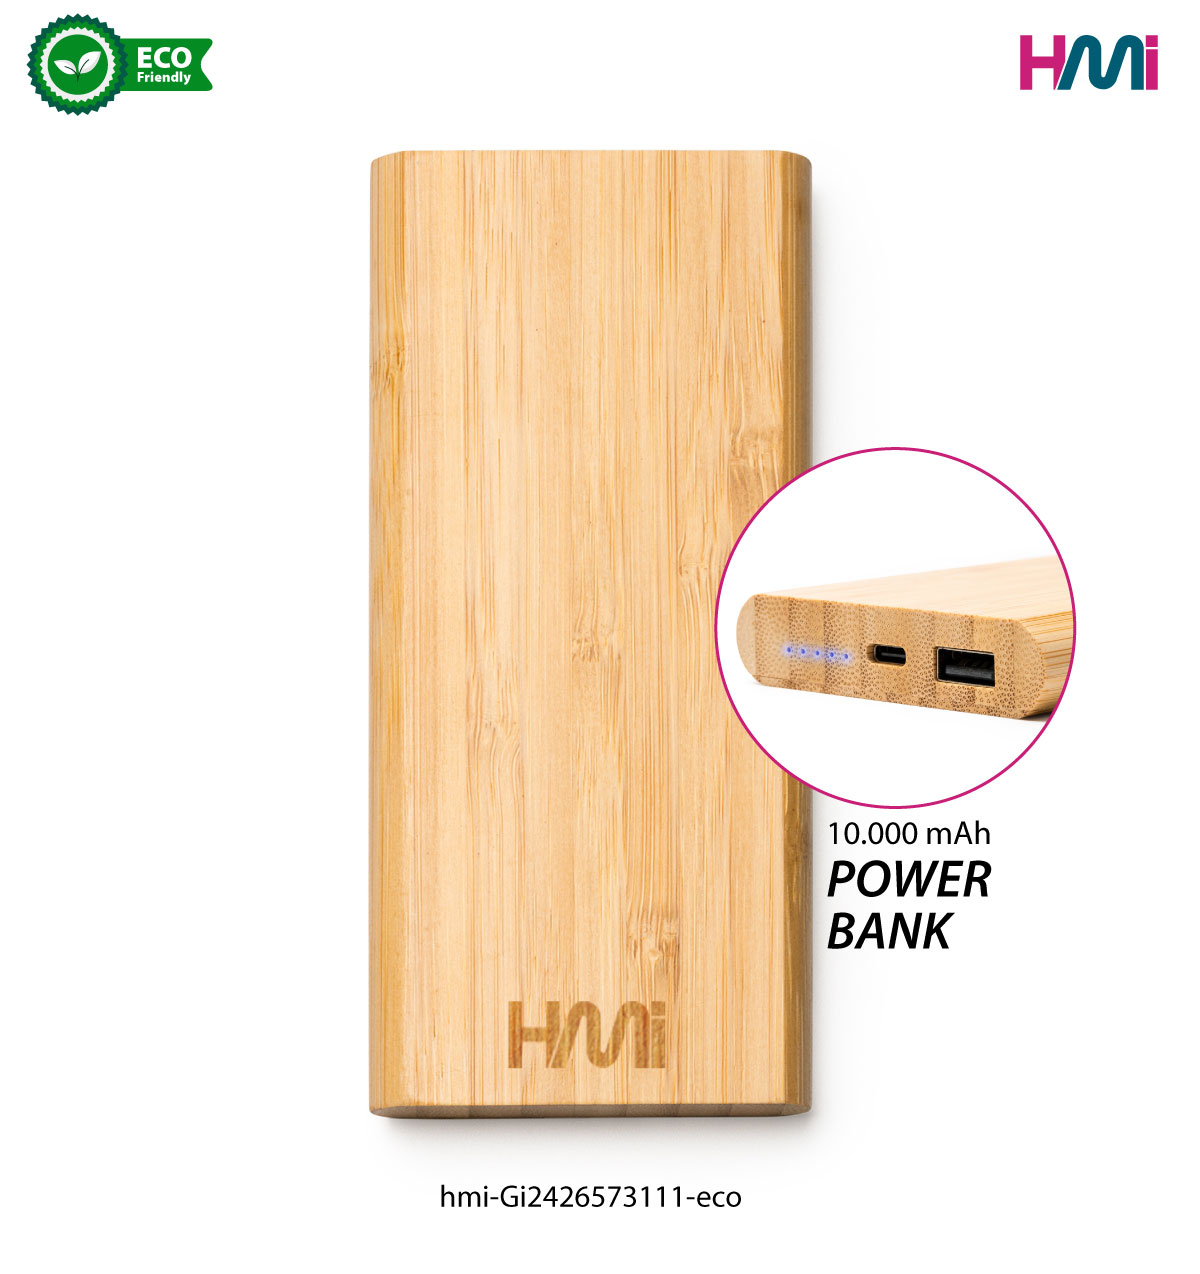 Power bank | Promotional power bank | Promotional power-bank in Germany | Eco-friendly promotional power bank in Germany at hmi-ad | Promotional Power bank with free shipping in Germany